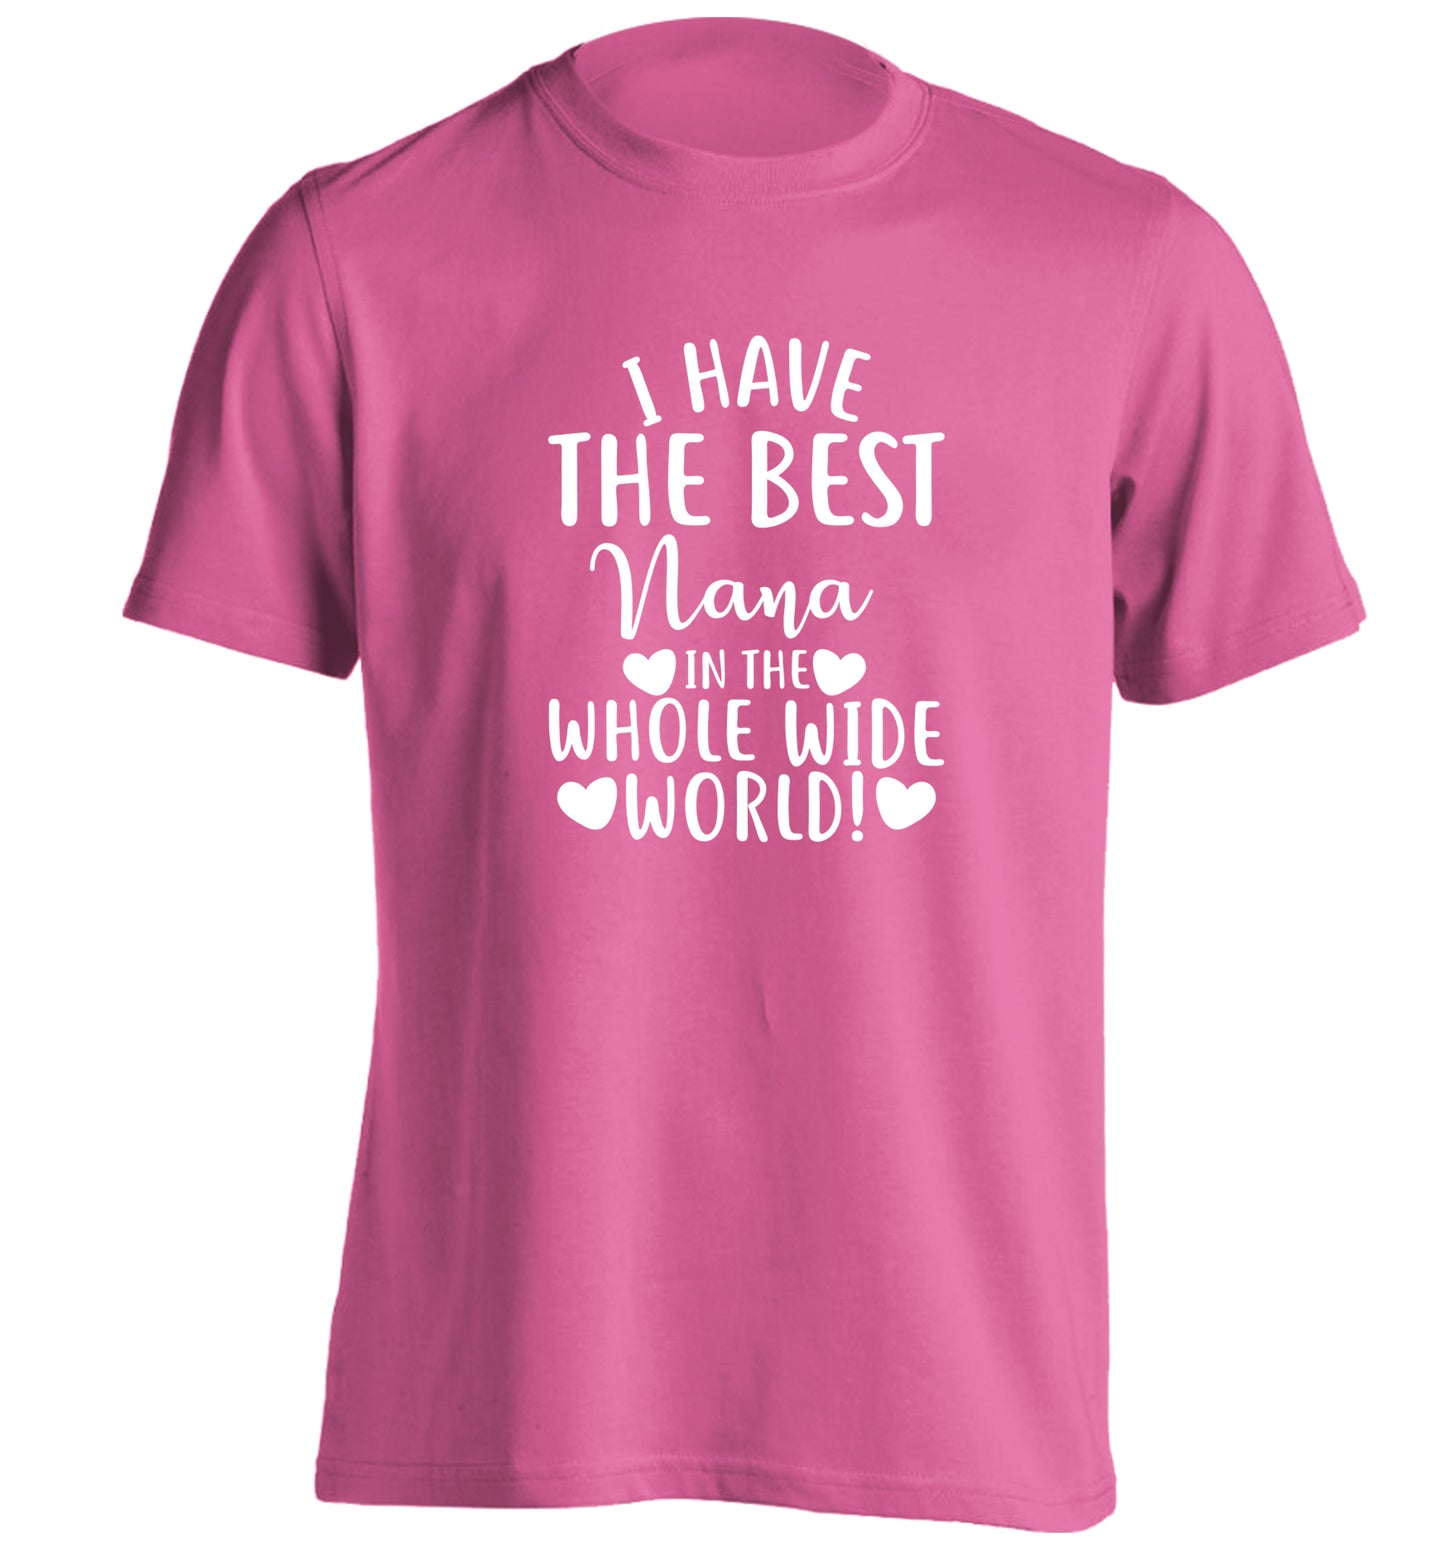 I have the best nana in the whole wide world! adults unisex pink Tshirt 2XL